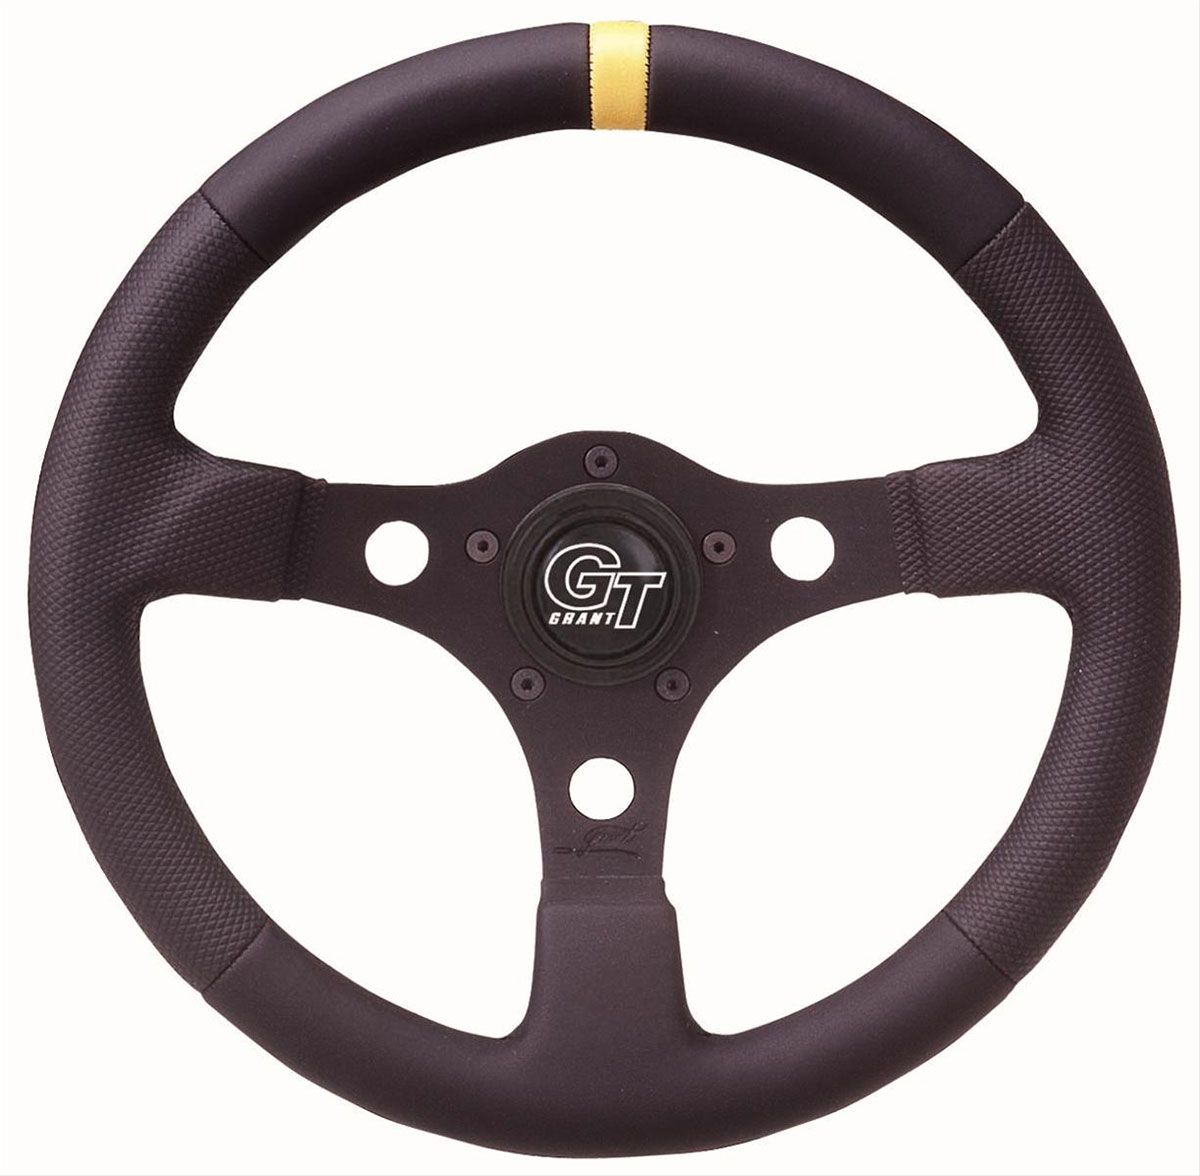 GR1075 - GRANT COMPETITION WHEEL 13DIA